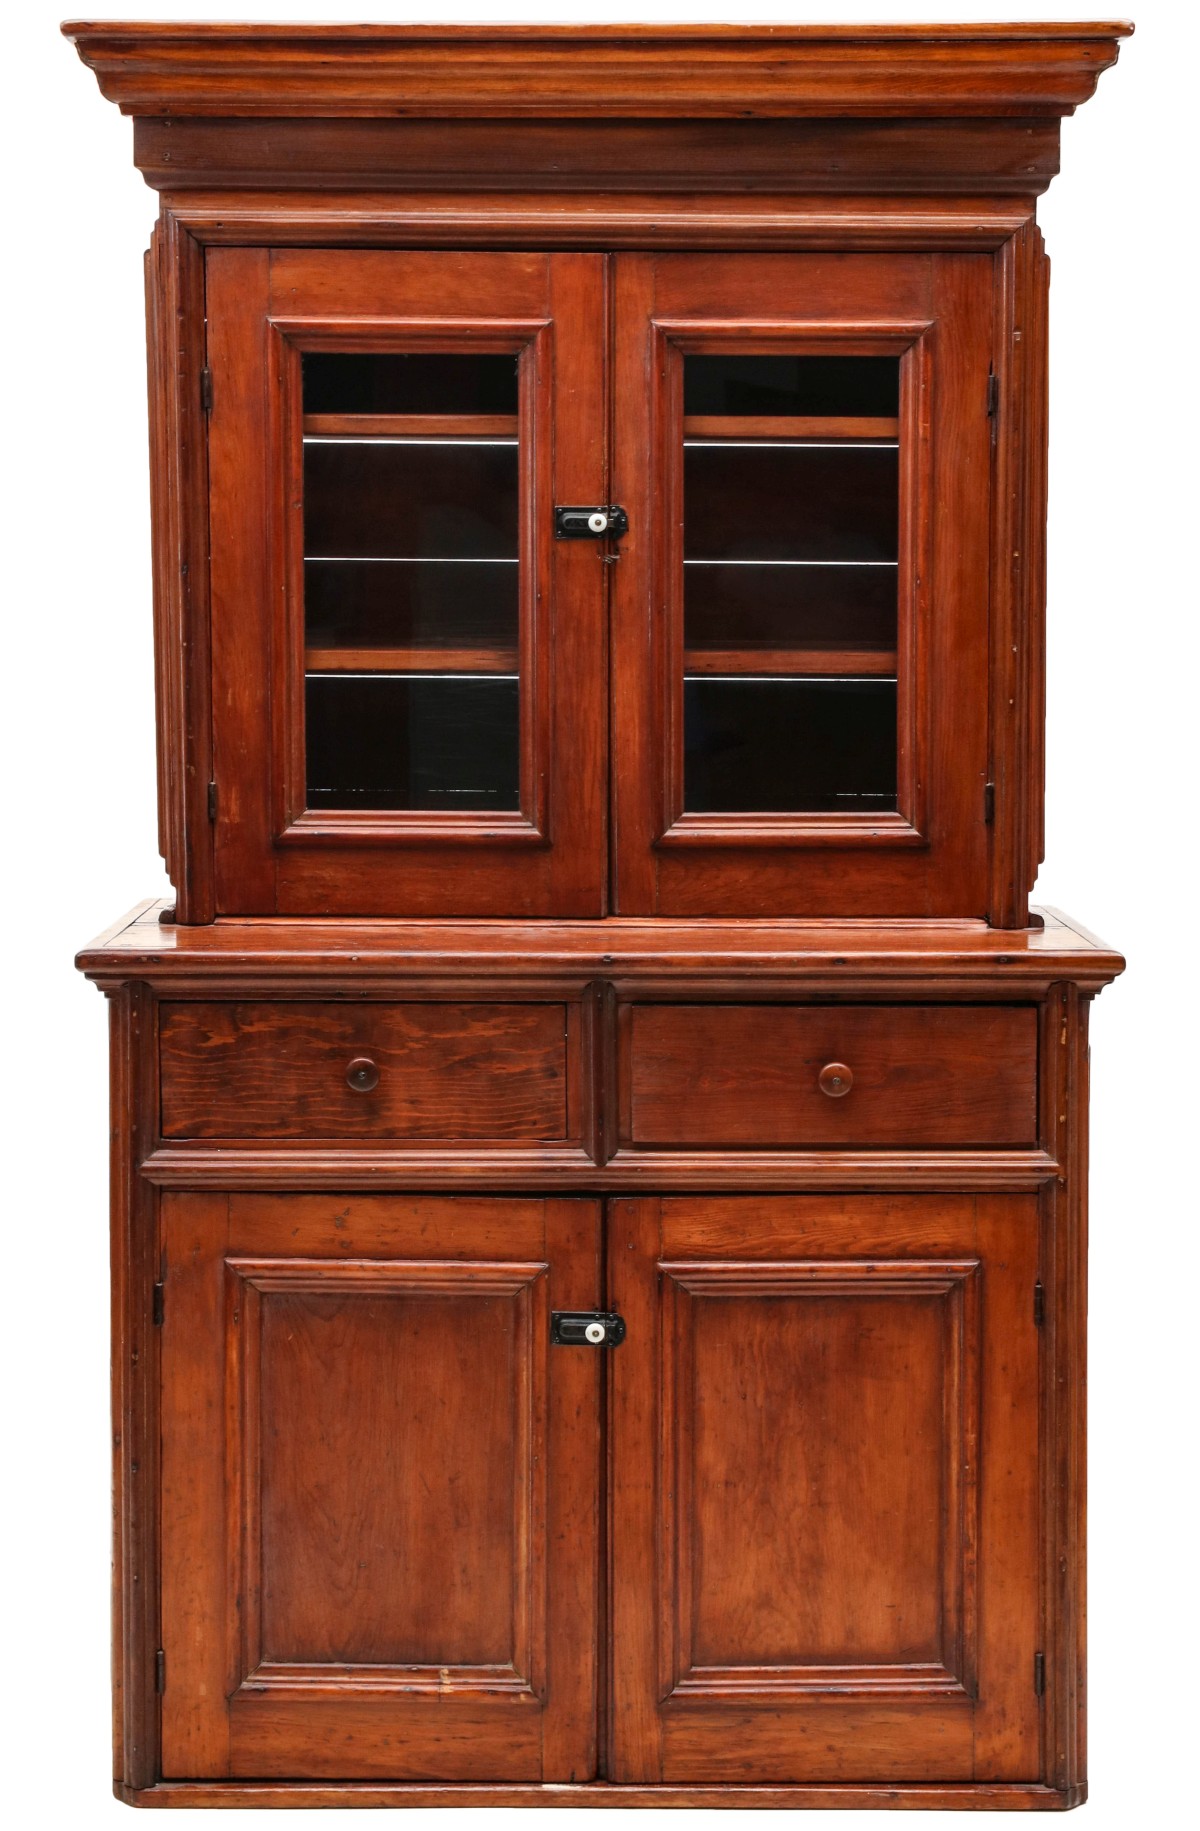 AN EARLY 20THC AMERICAN PANELED PINE STEP BACK CUPBOARD